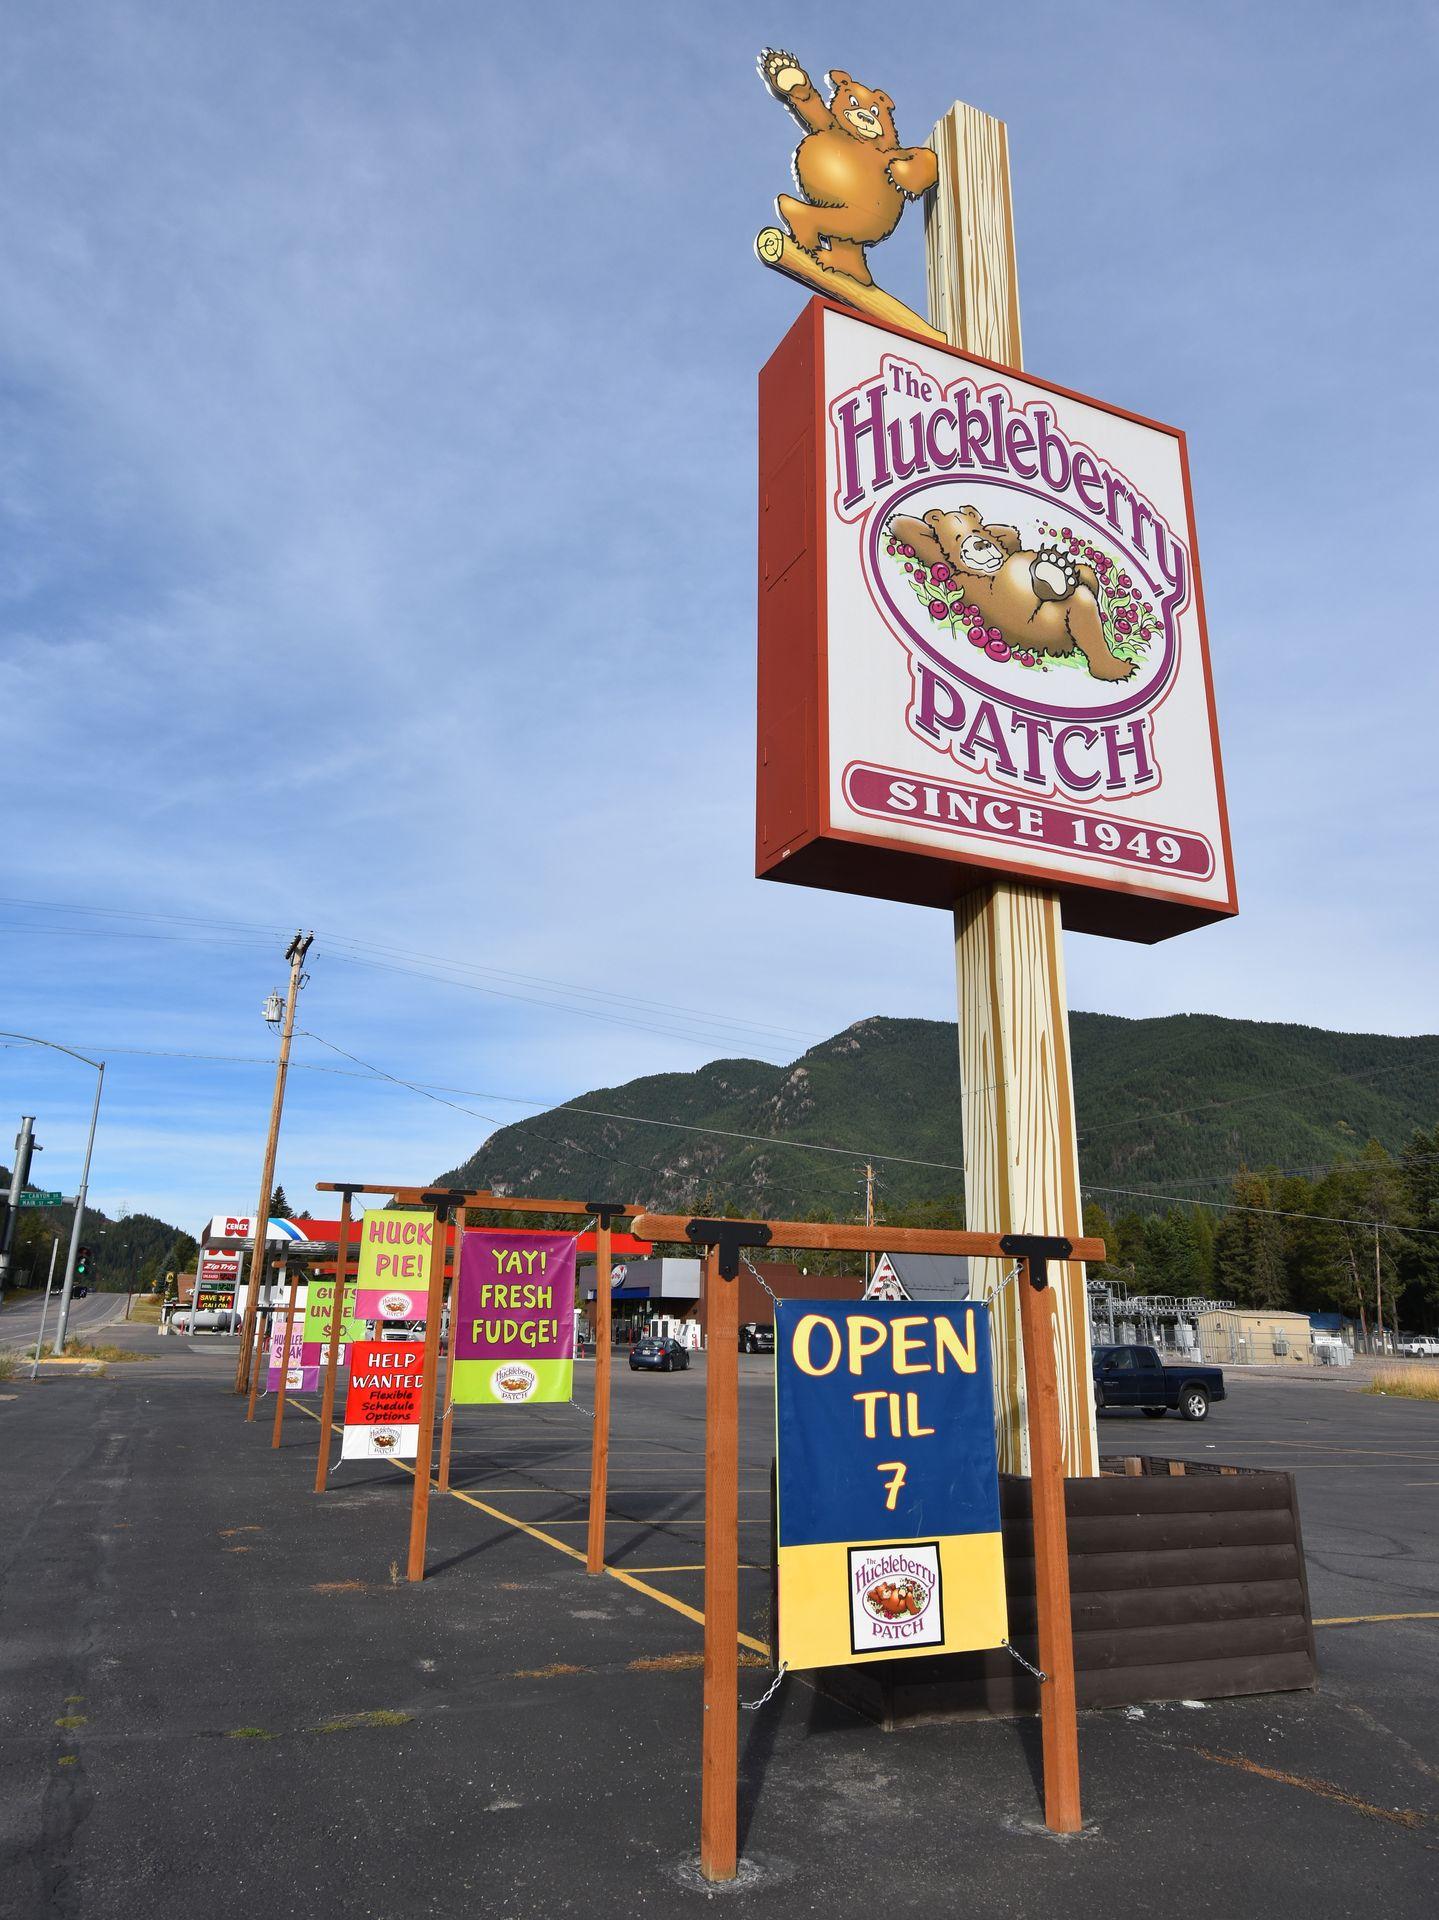 A sign for The Huckleberry Patch in their parking lot. There are animated bears on the sign and it reads "since 1949." Closer to the ground, signs read "open til 7" and "Yay! Fresh Fudge" and "Huck Pie!"